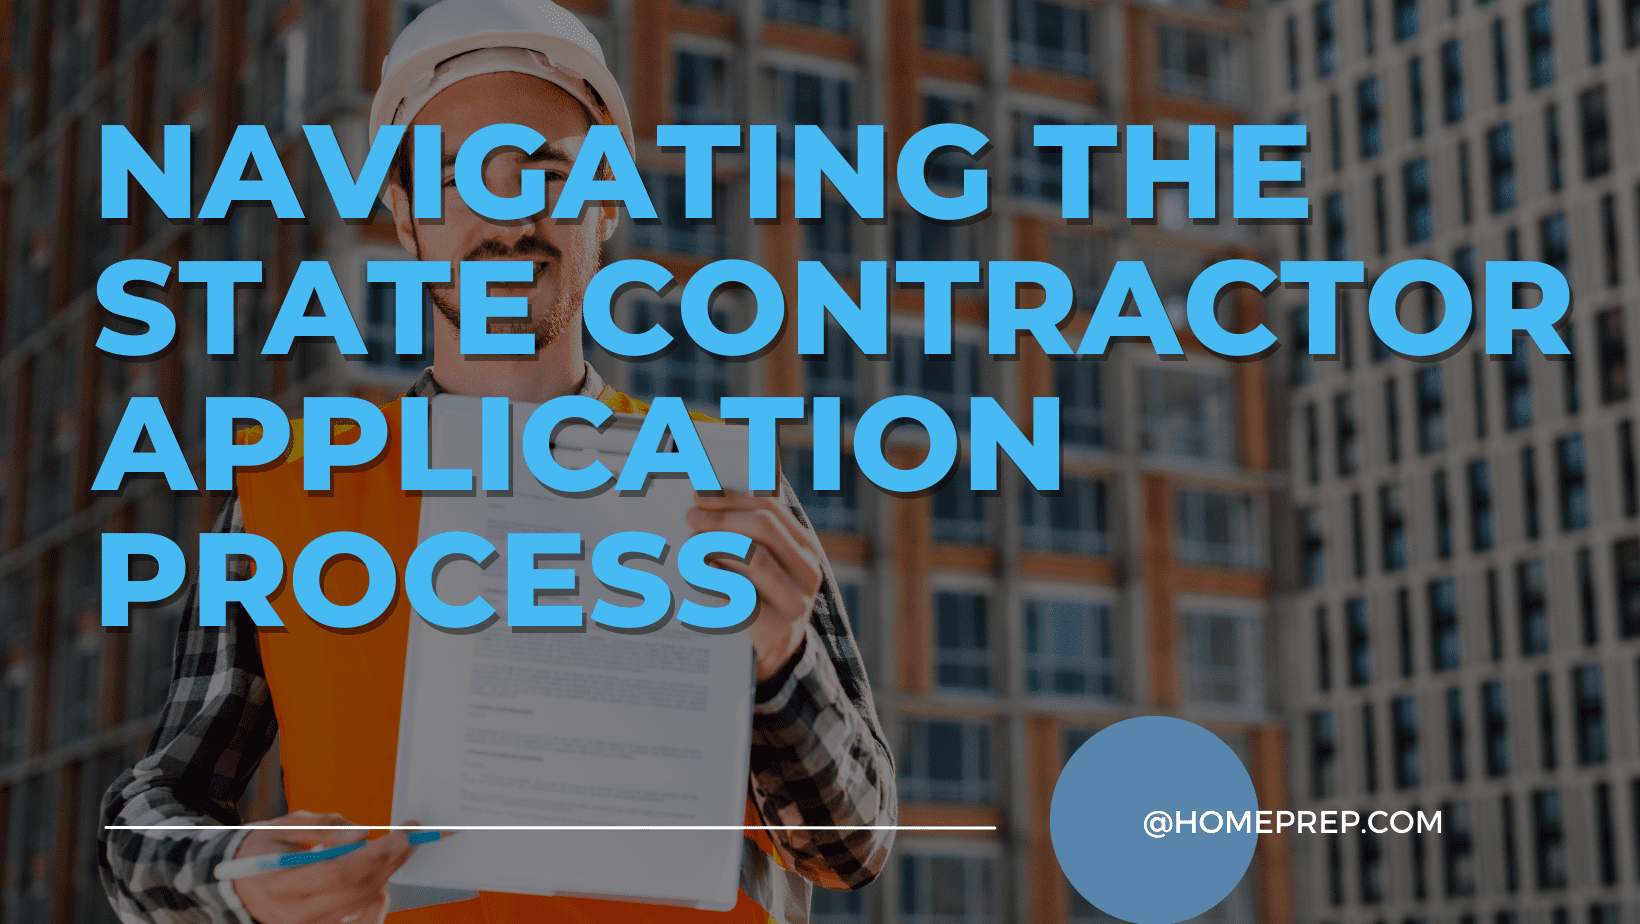 10 Simple Steps To The Application Process For State Contractor Licensing Exams